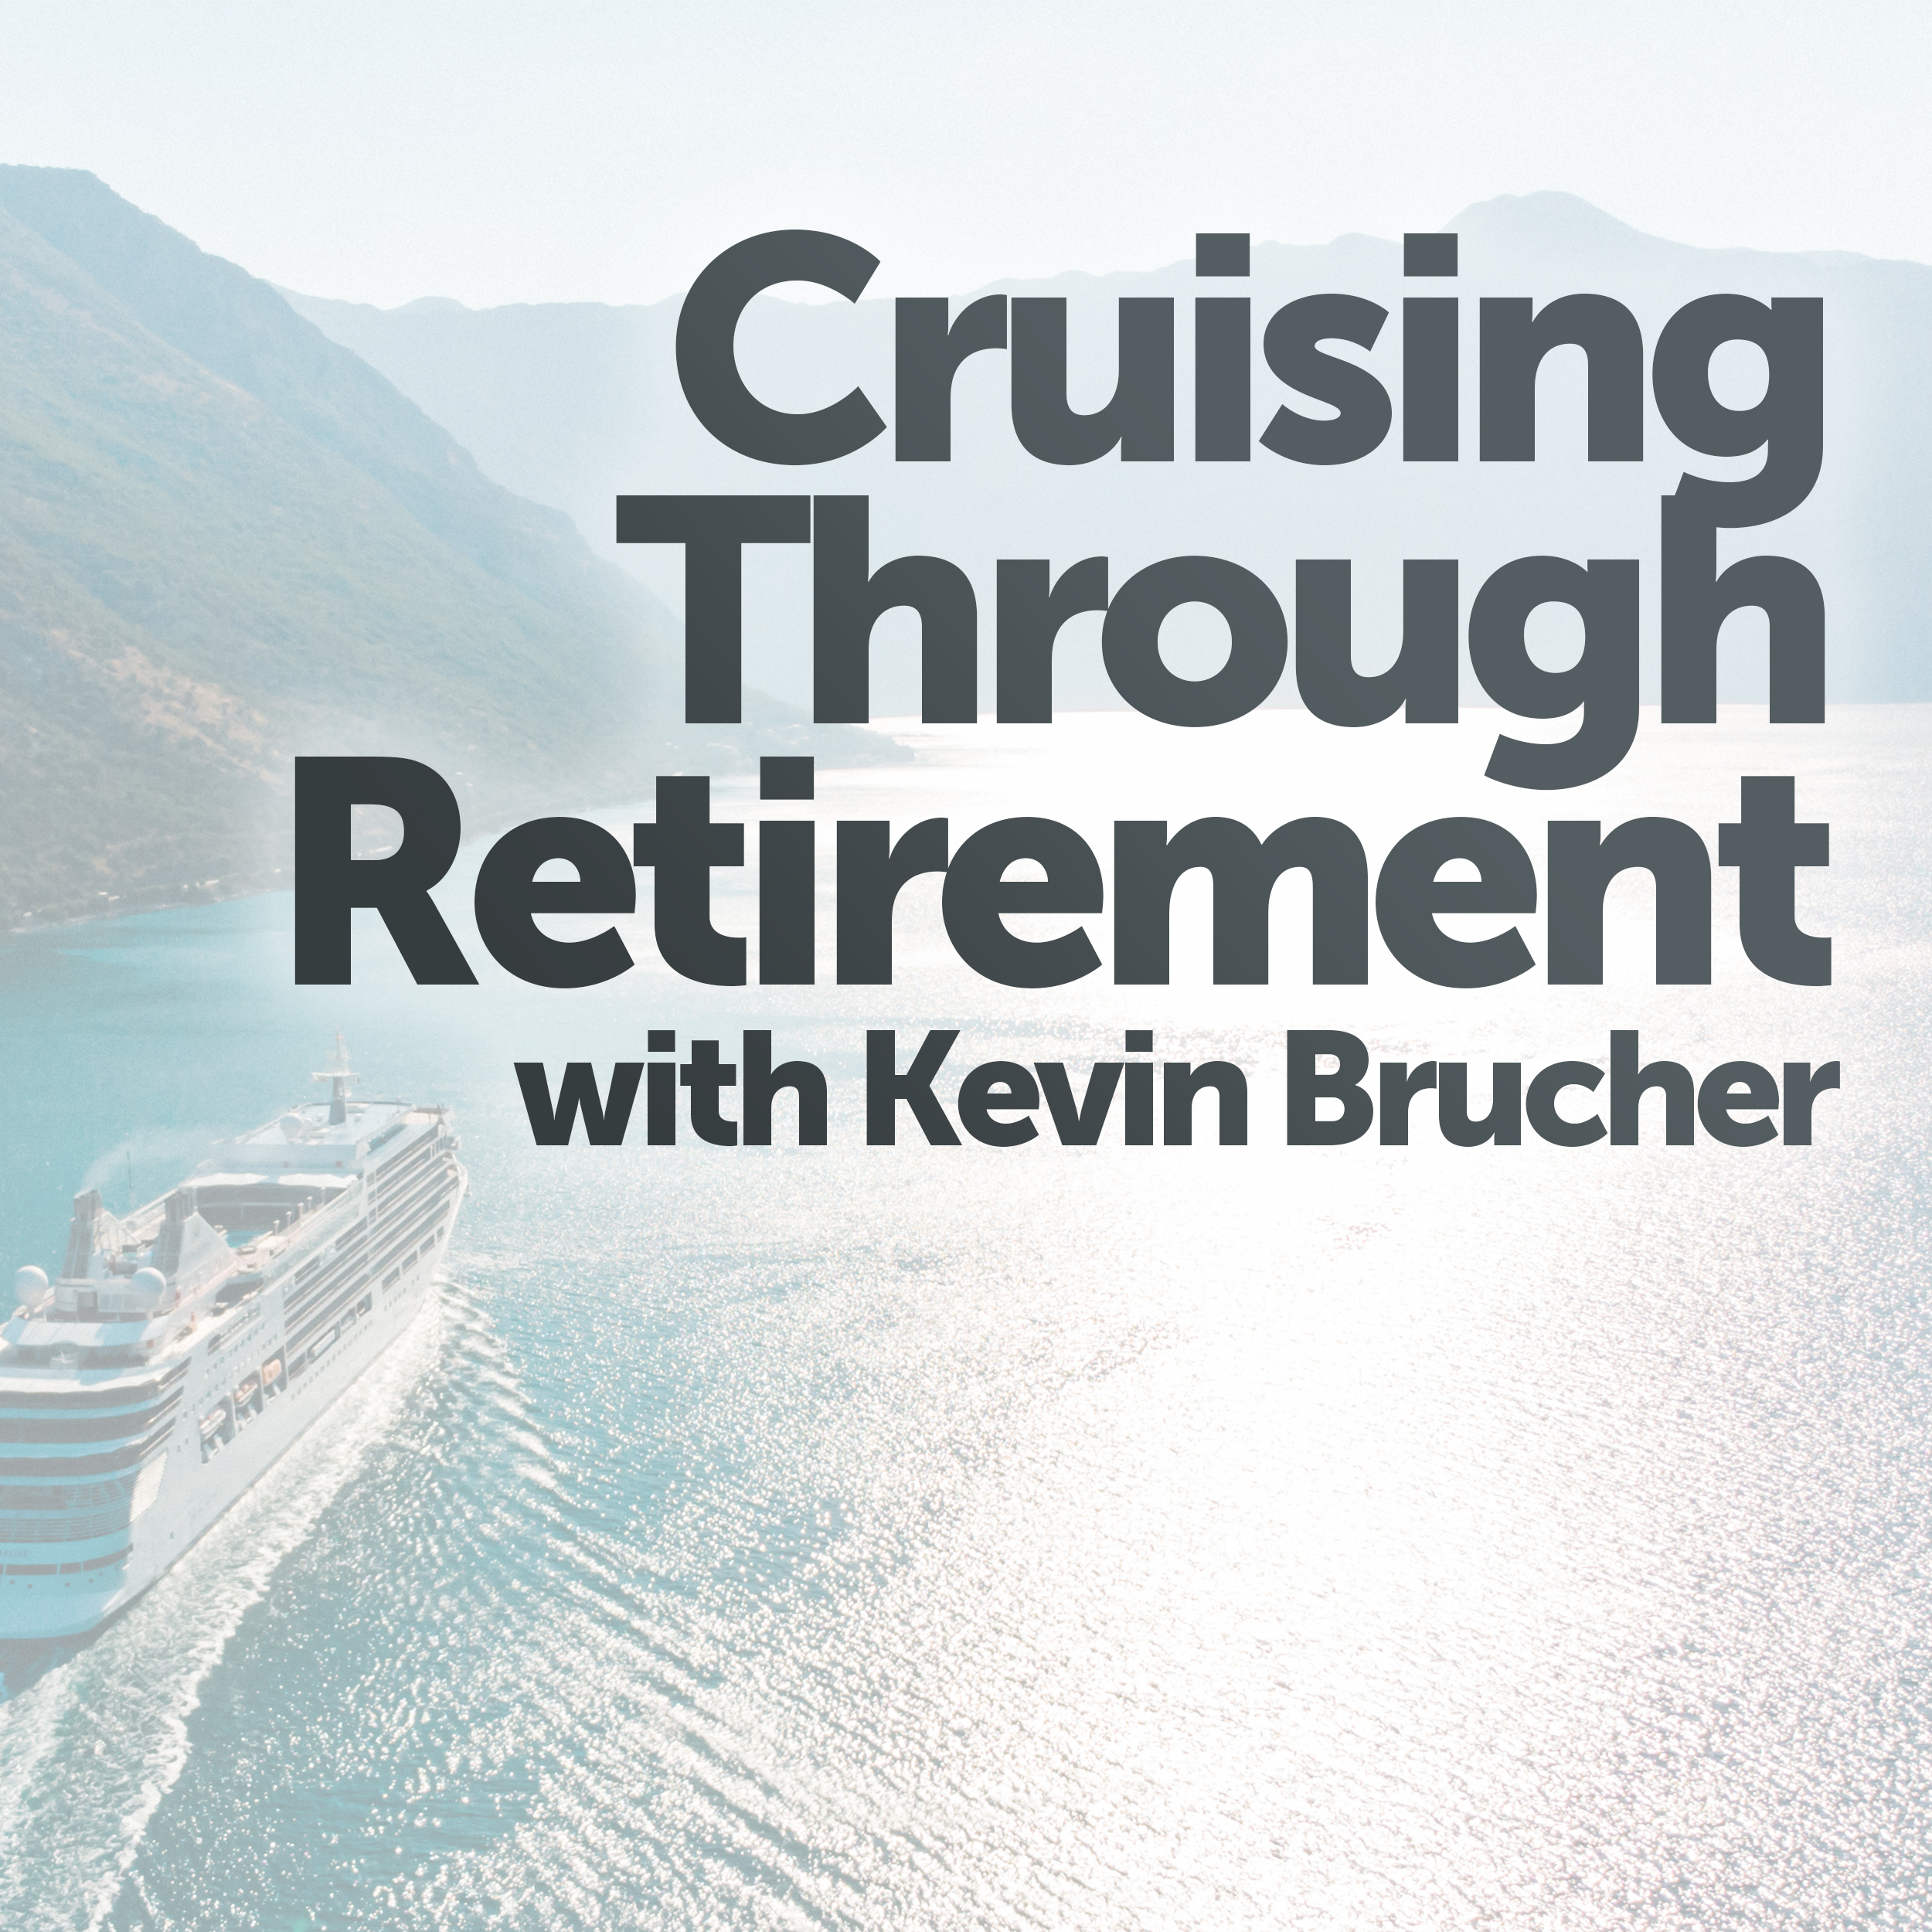 Cruising Through Retirement This week Kevin Brucher offers some tips to help minimize some taxes. That and much more on Cruising Through Retirement